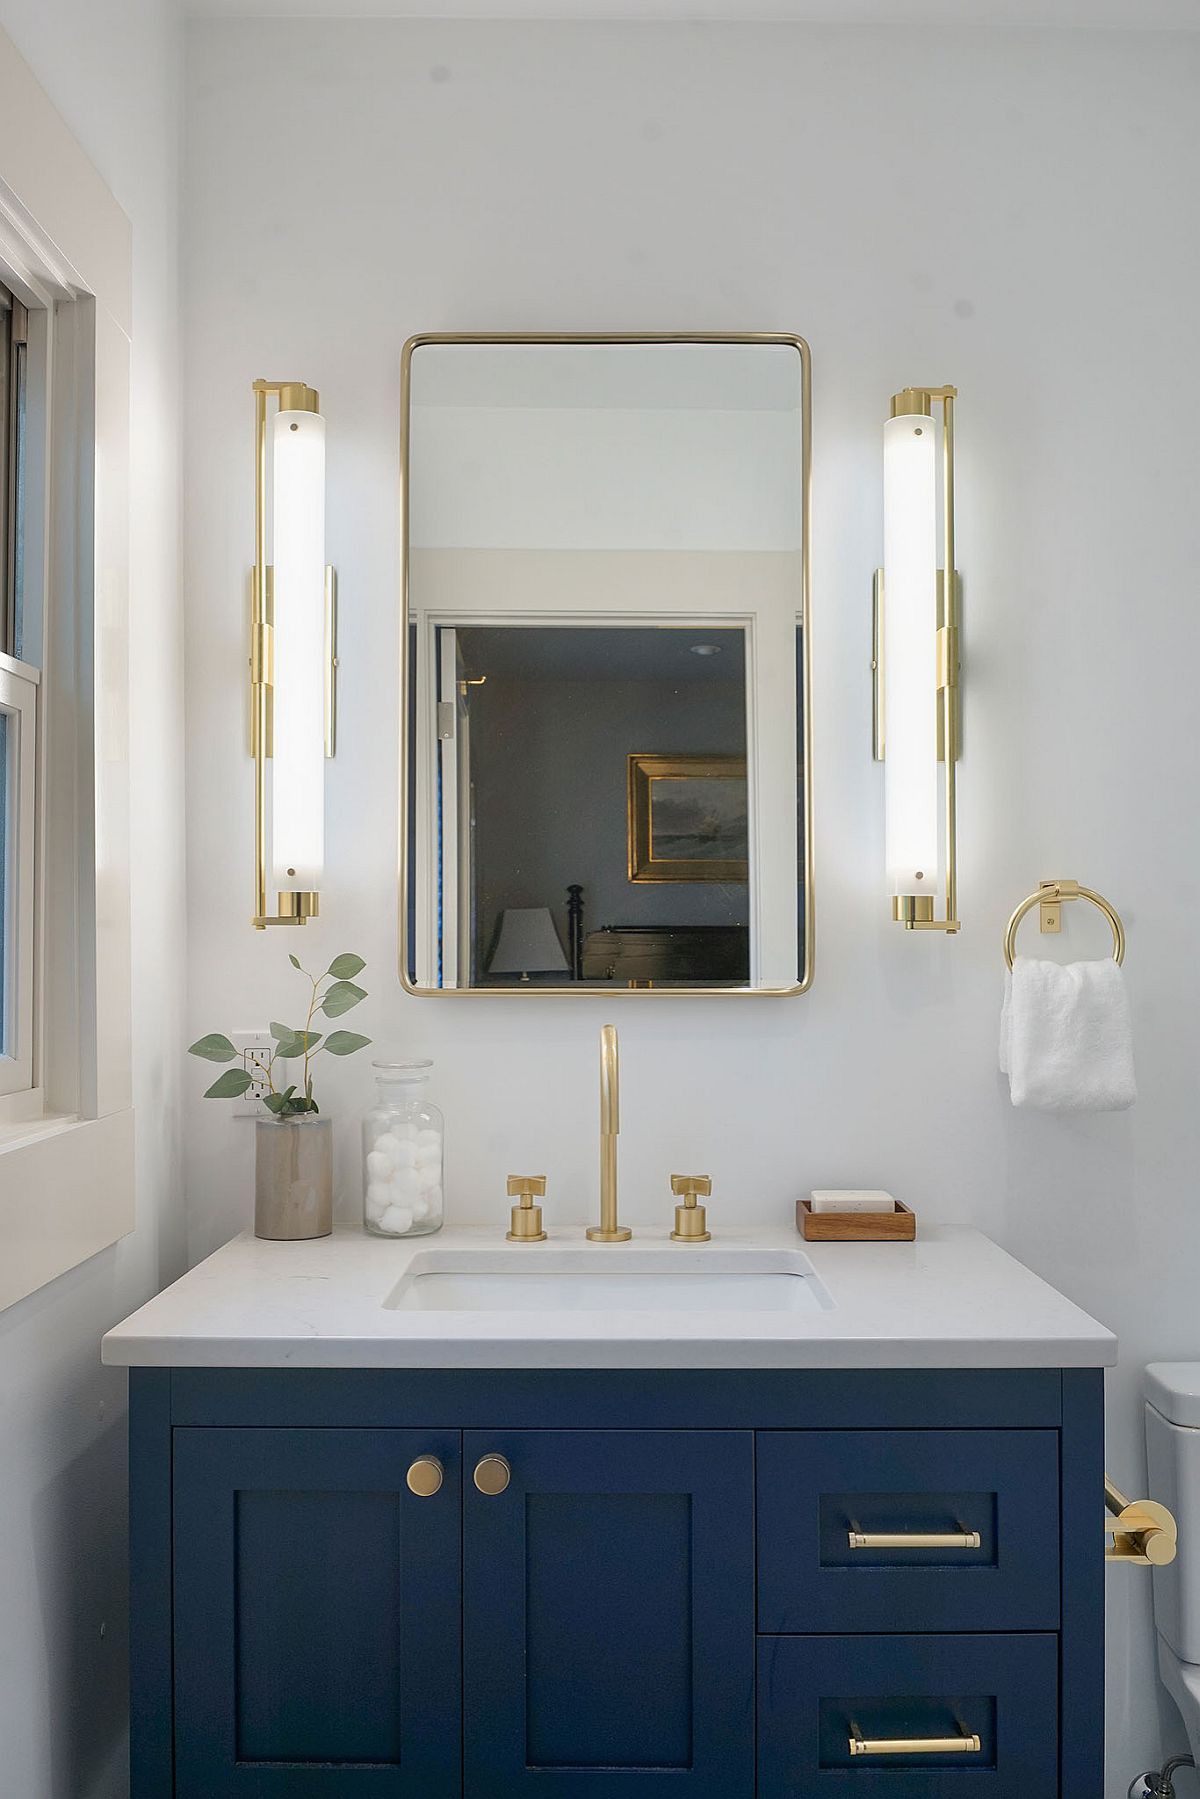 Combining gold accents with the dashing blue vanity in the modern bathroom